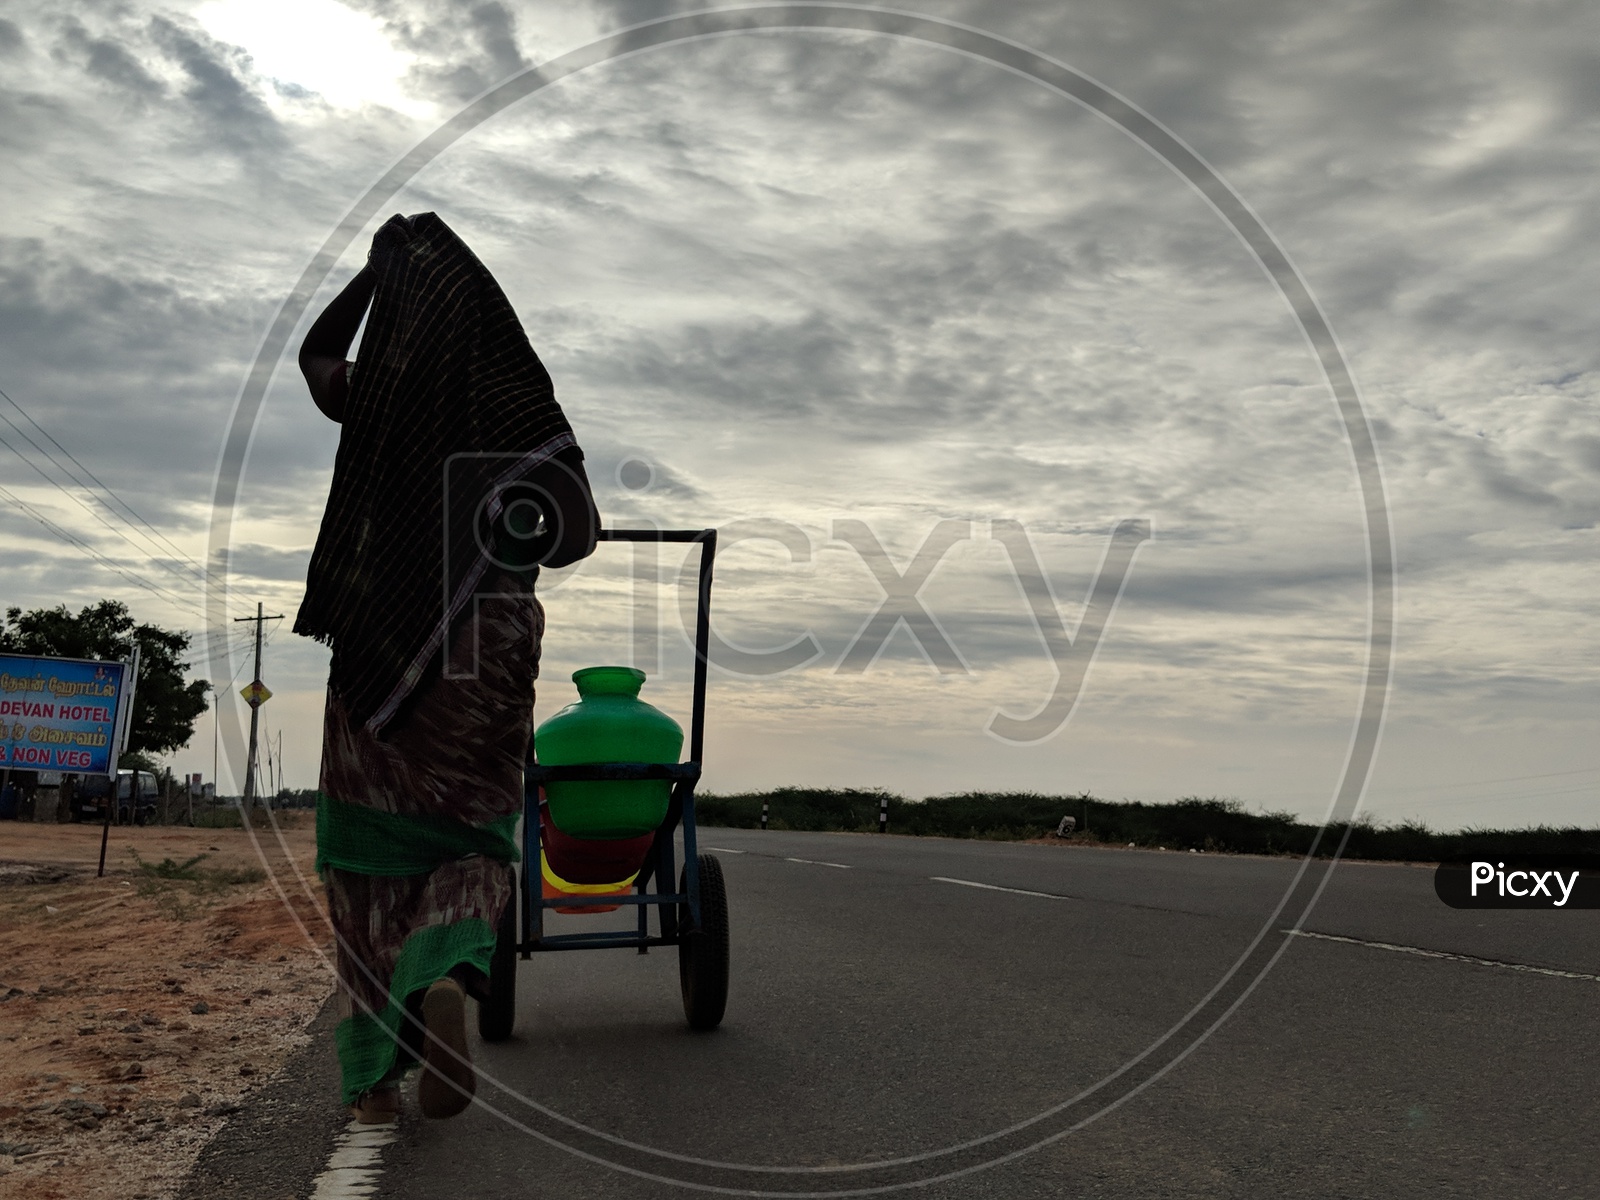 Village Woman walking with a trolley